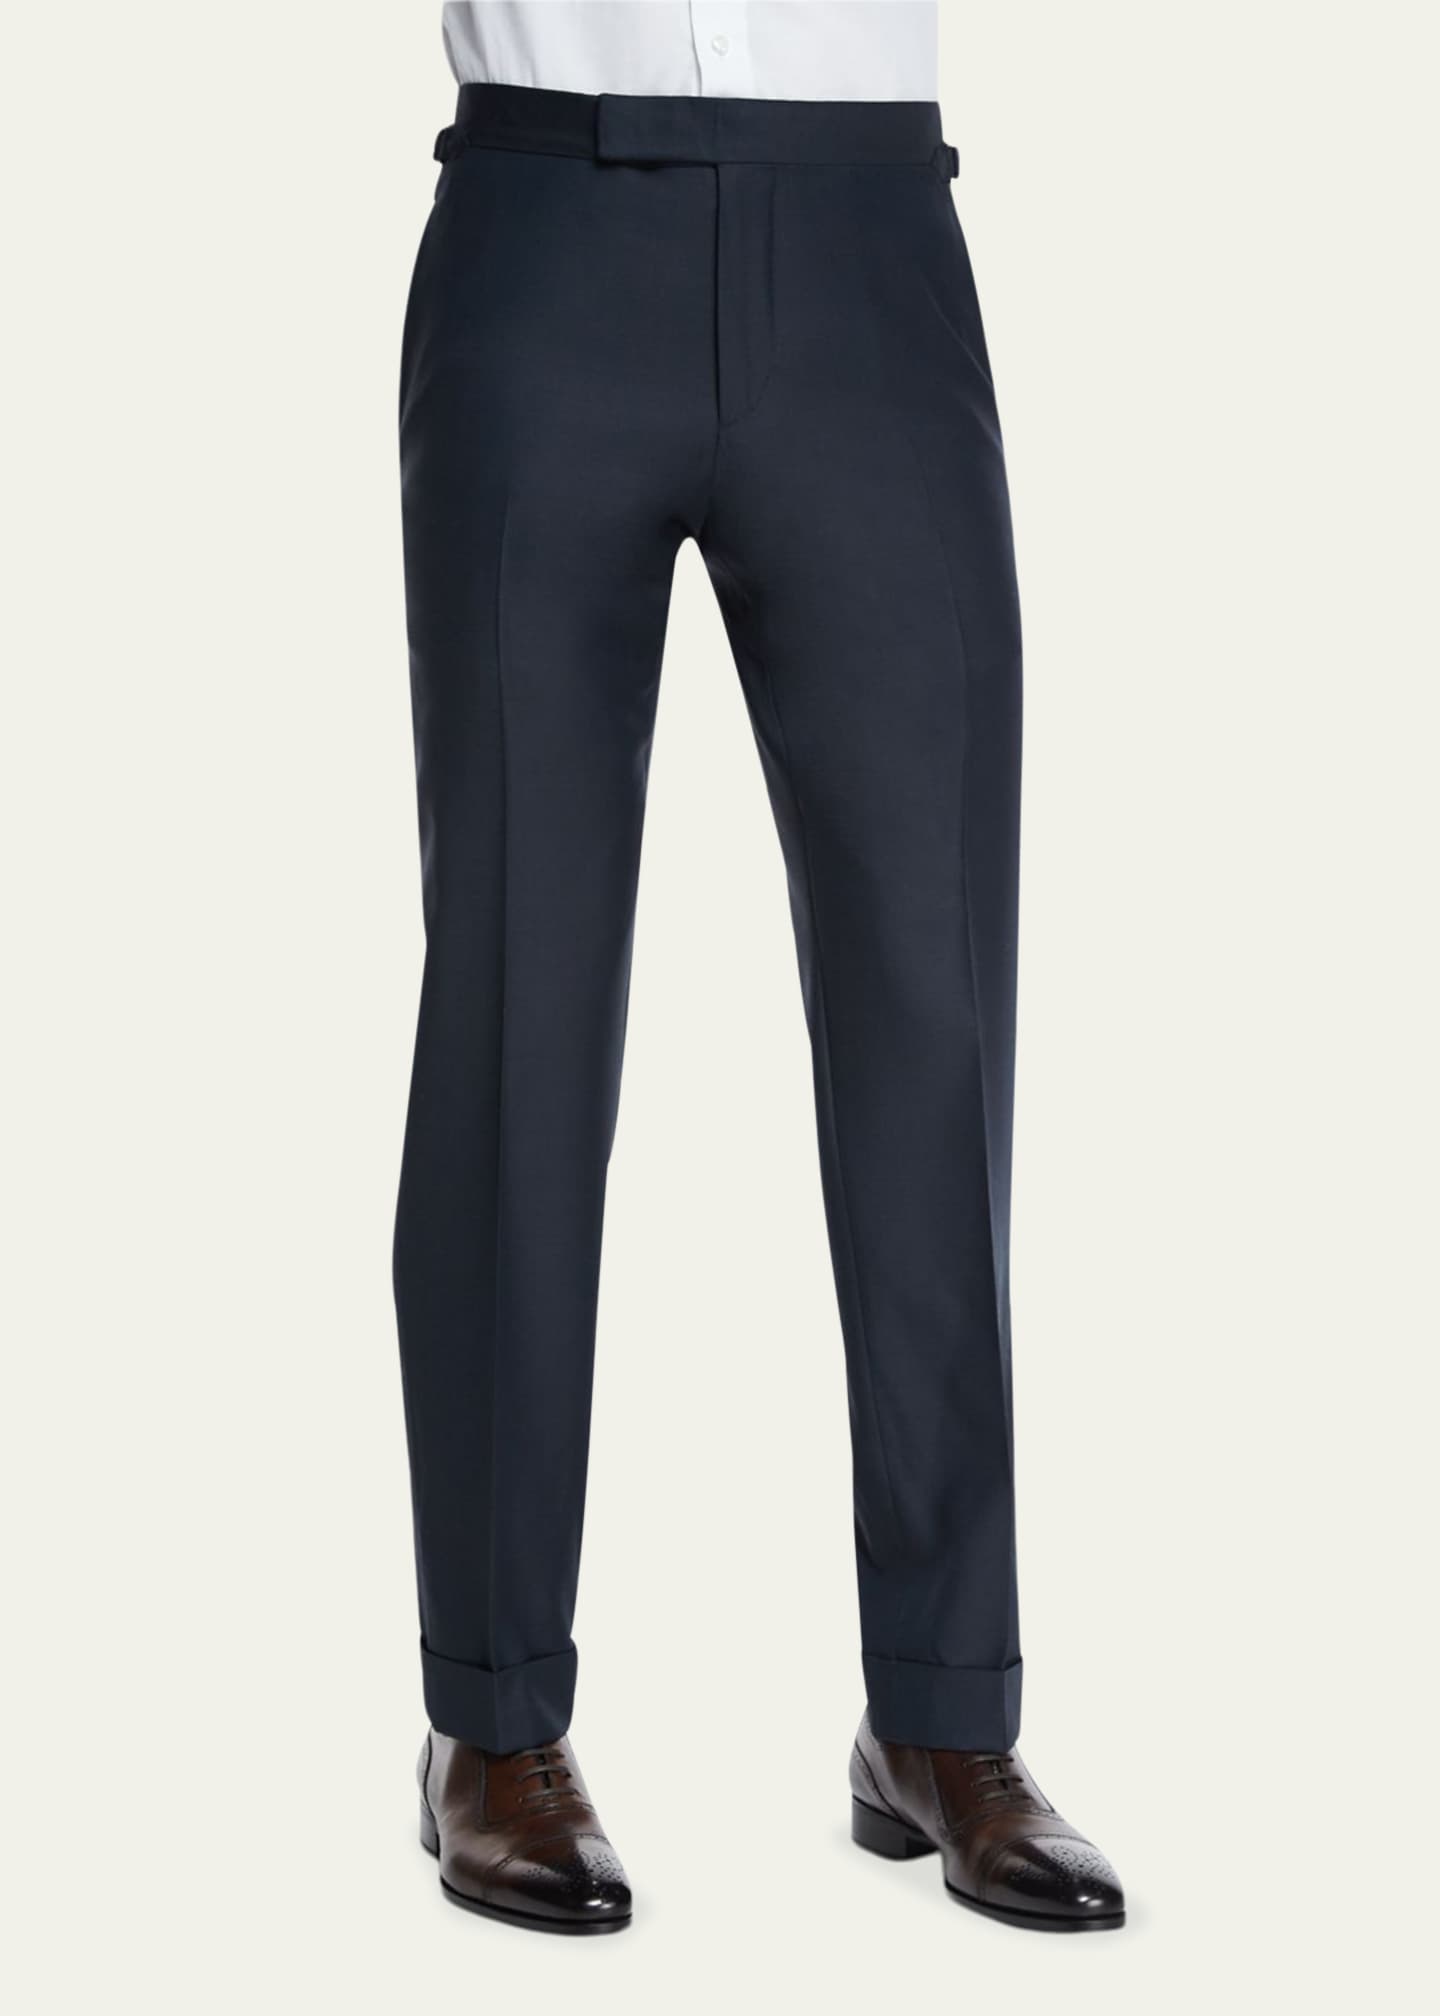 TOM FORD O'Connor Base Flat-Front Sharkskin Trousers, Navy - Bergdorf ...